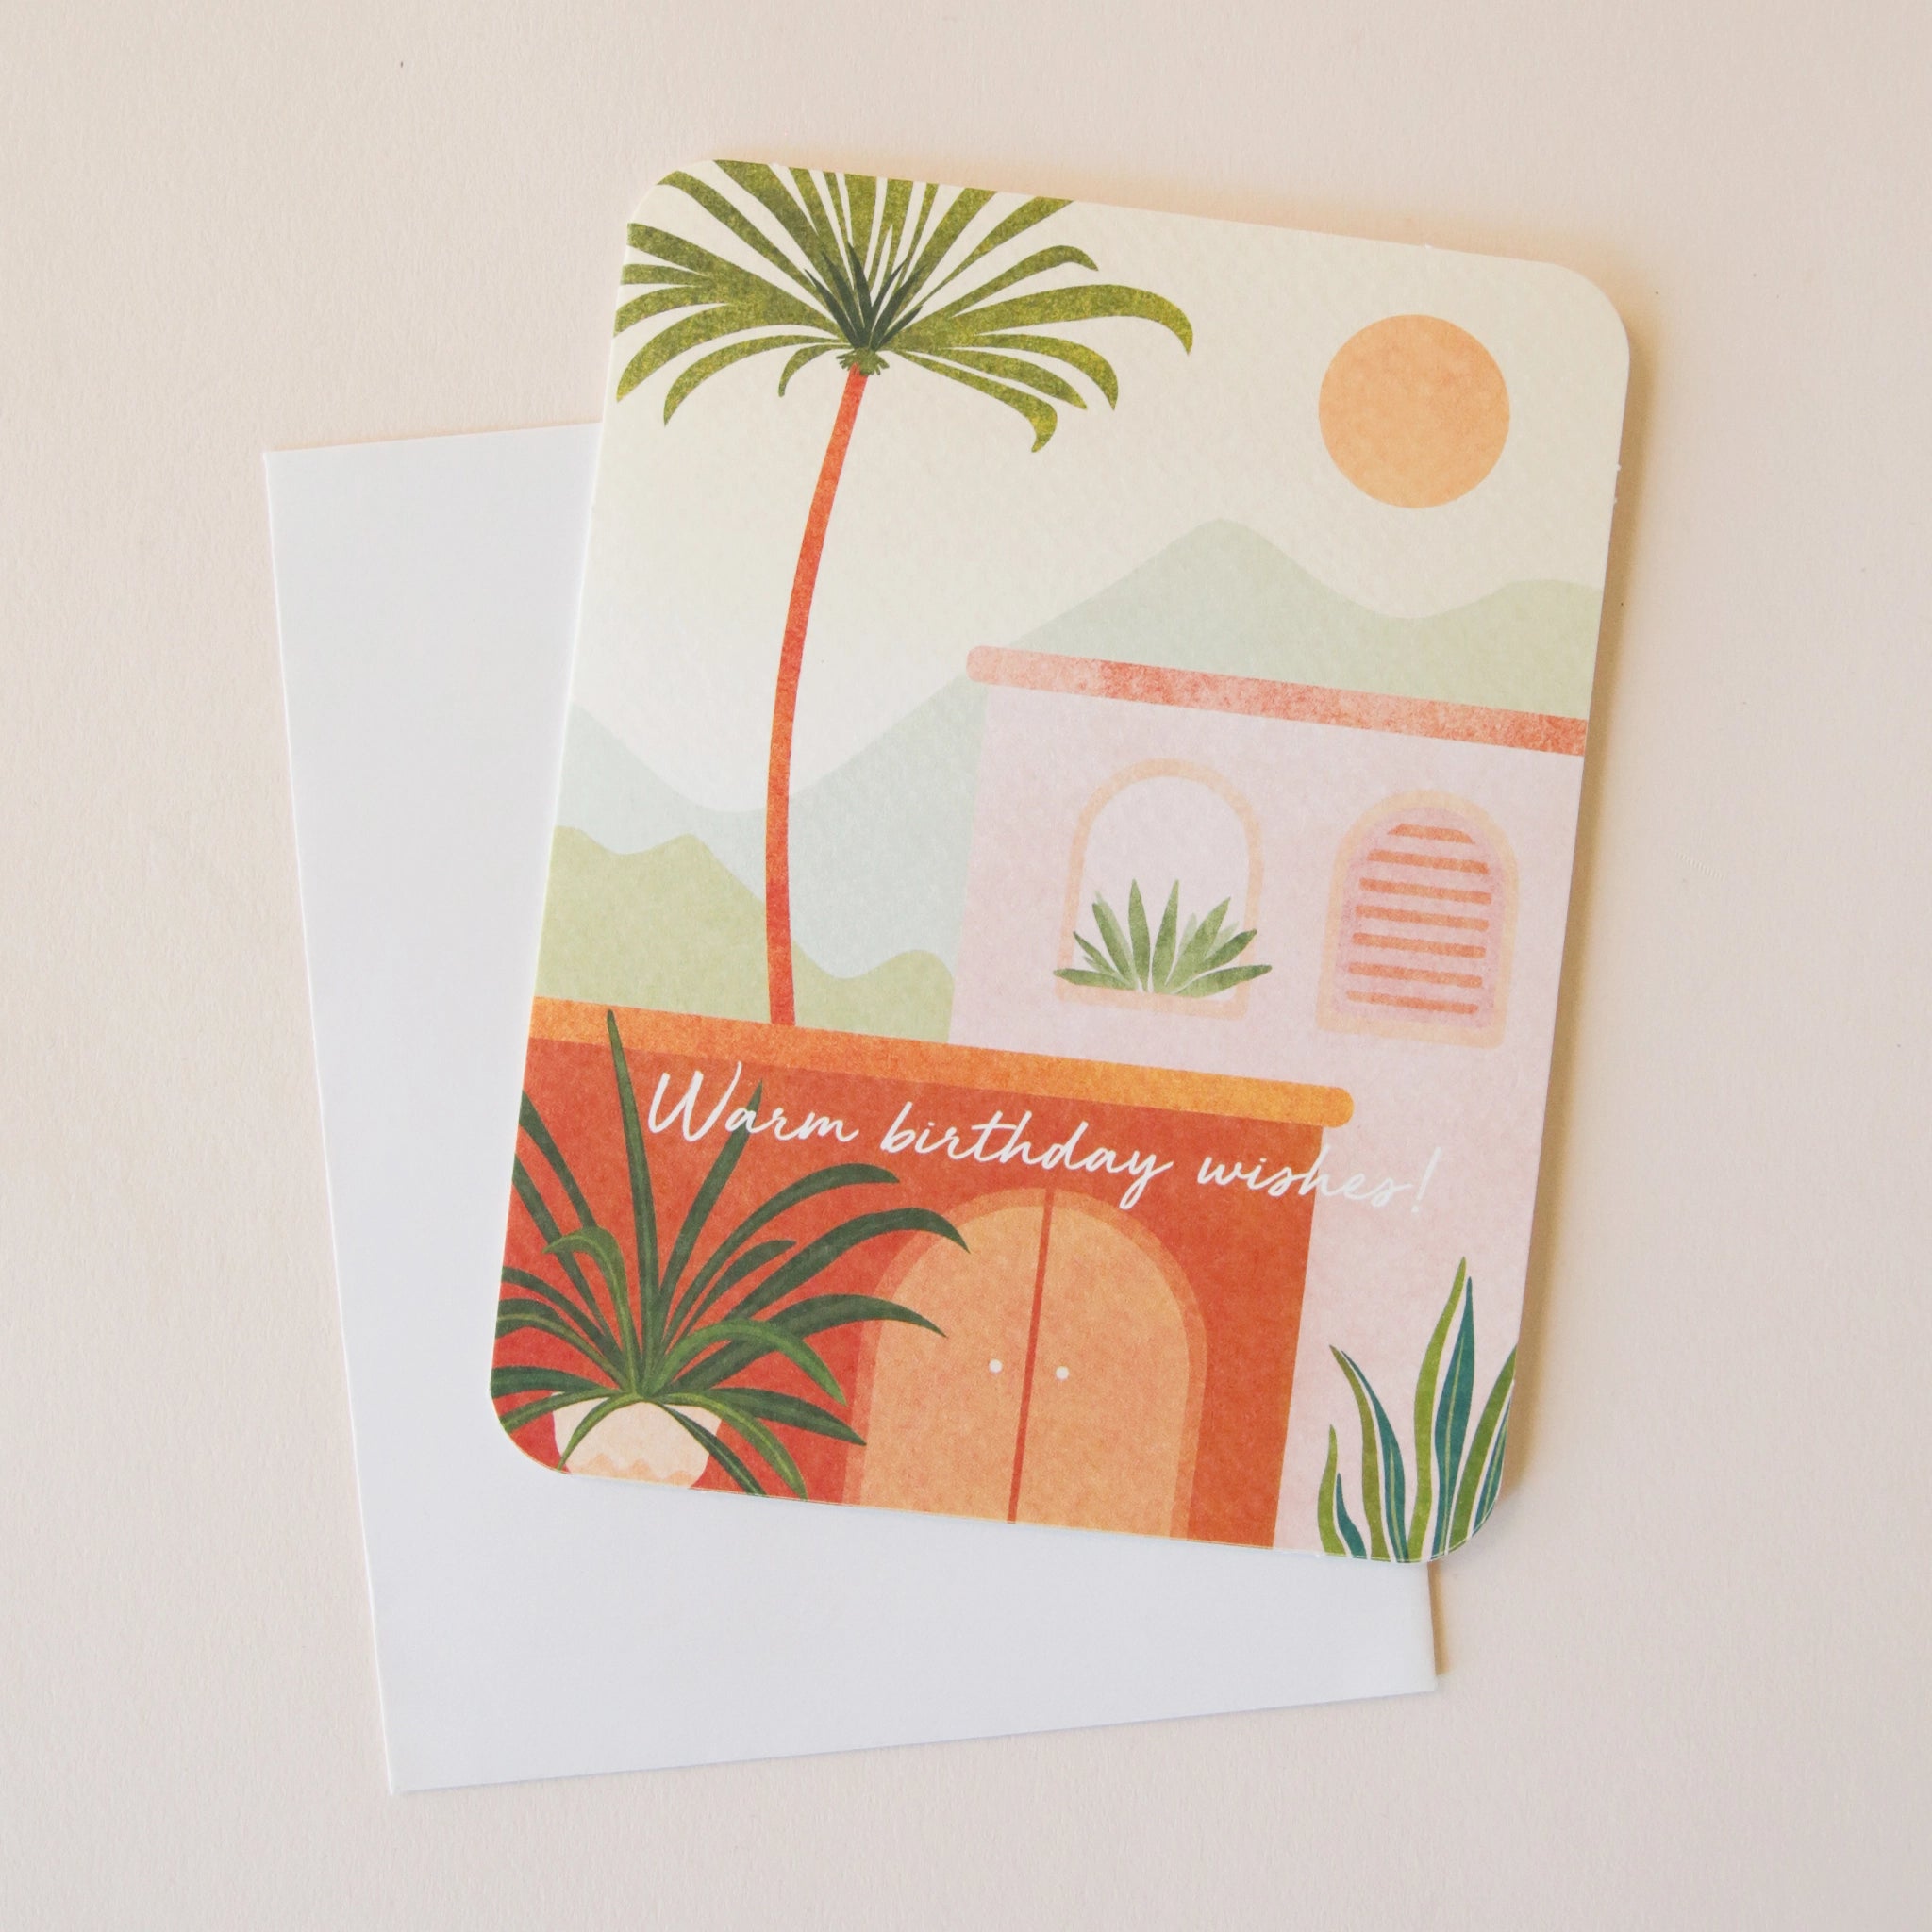 On a neutral background is a card with a sun and palm tree graphic along with a coordinating sticker and text along the front that reads, "Warm birthday wishes".